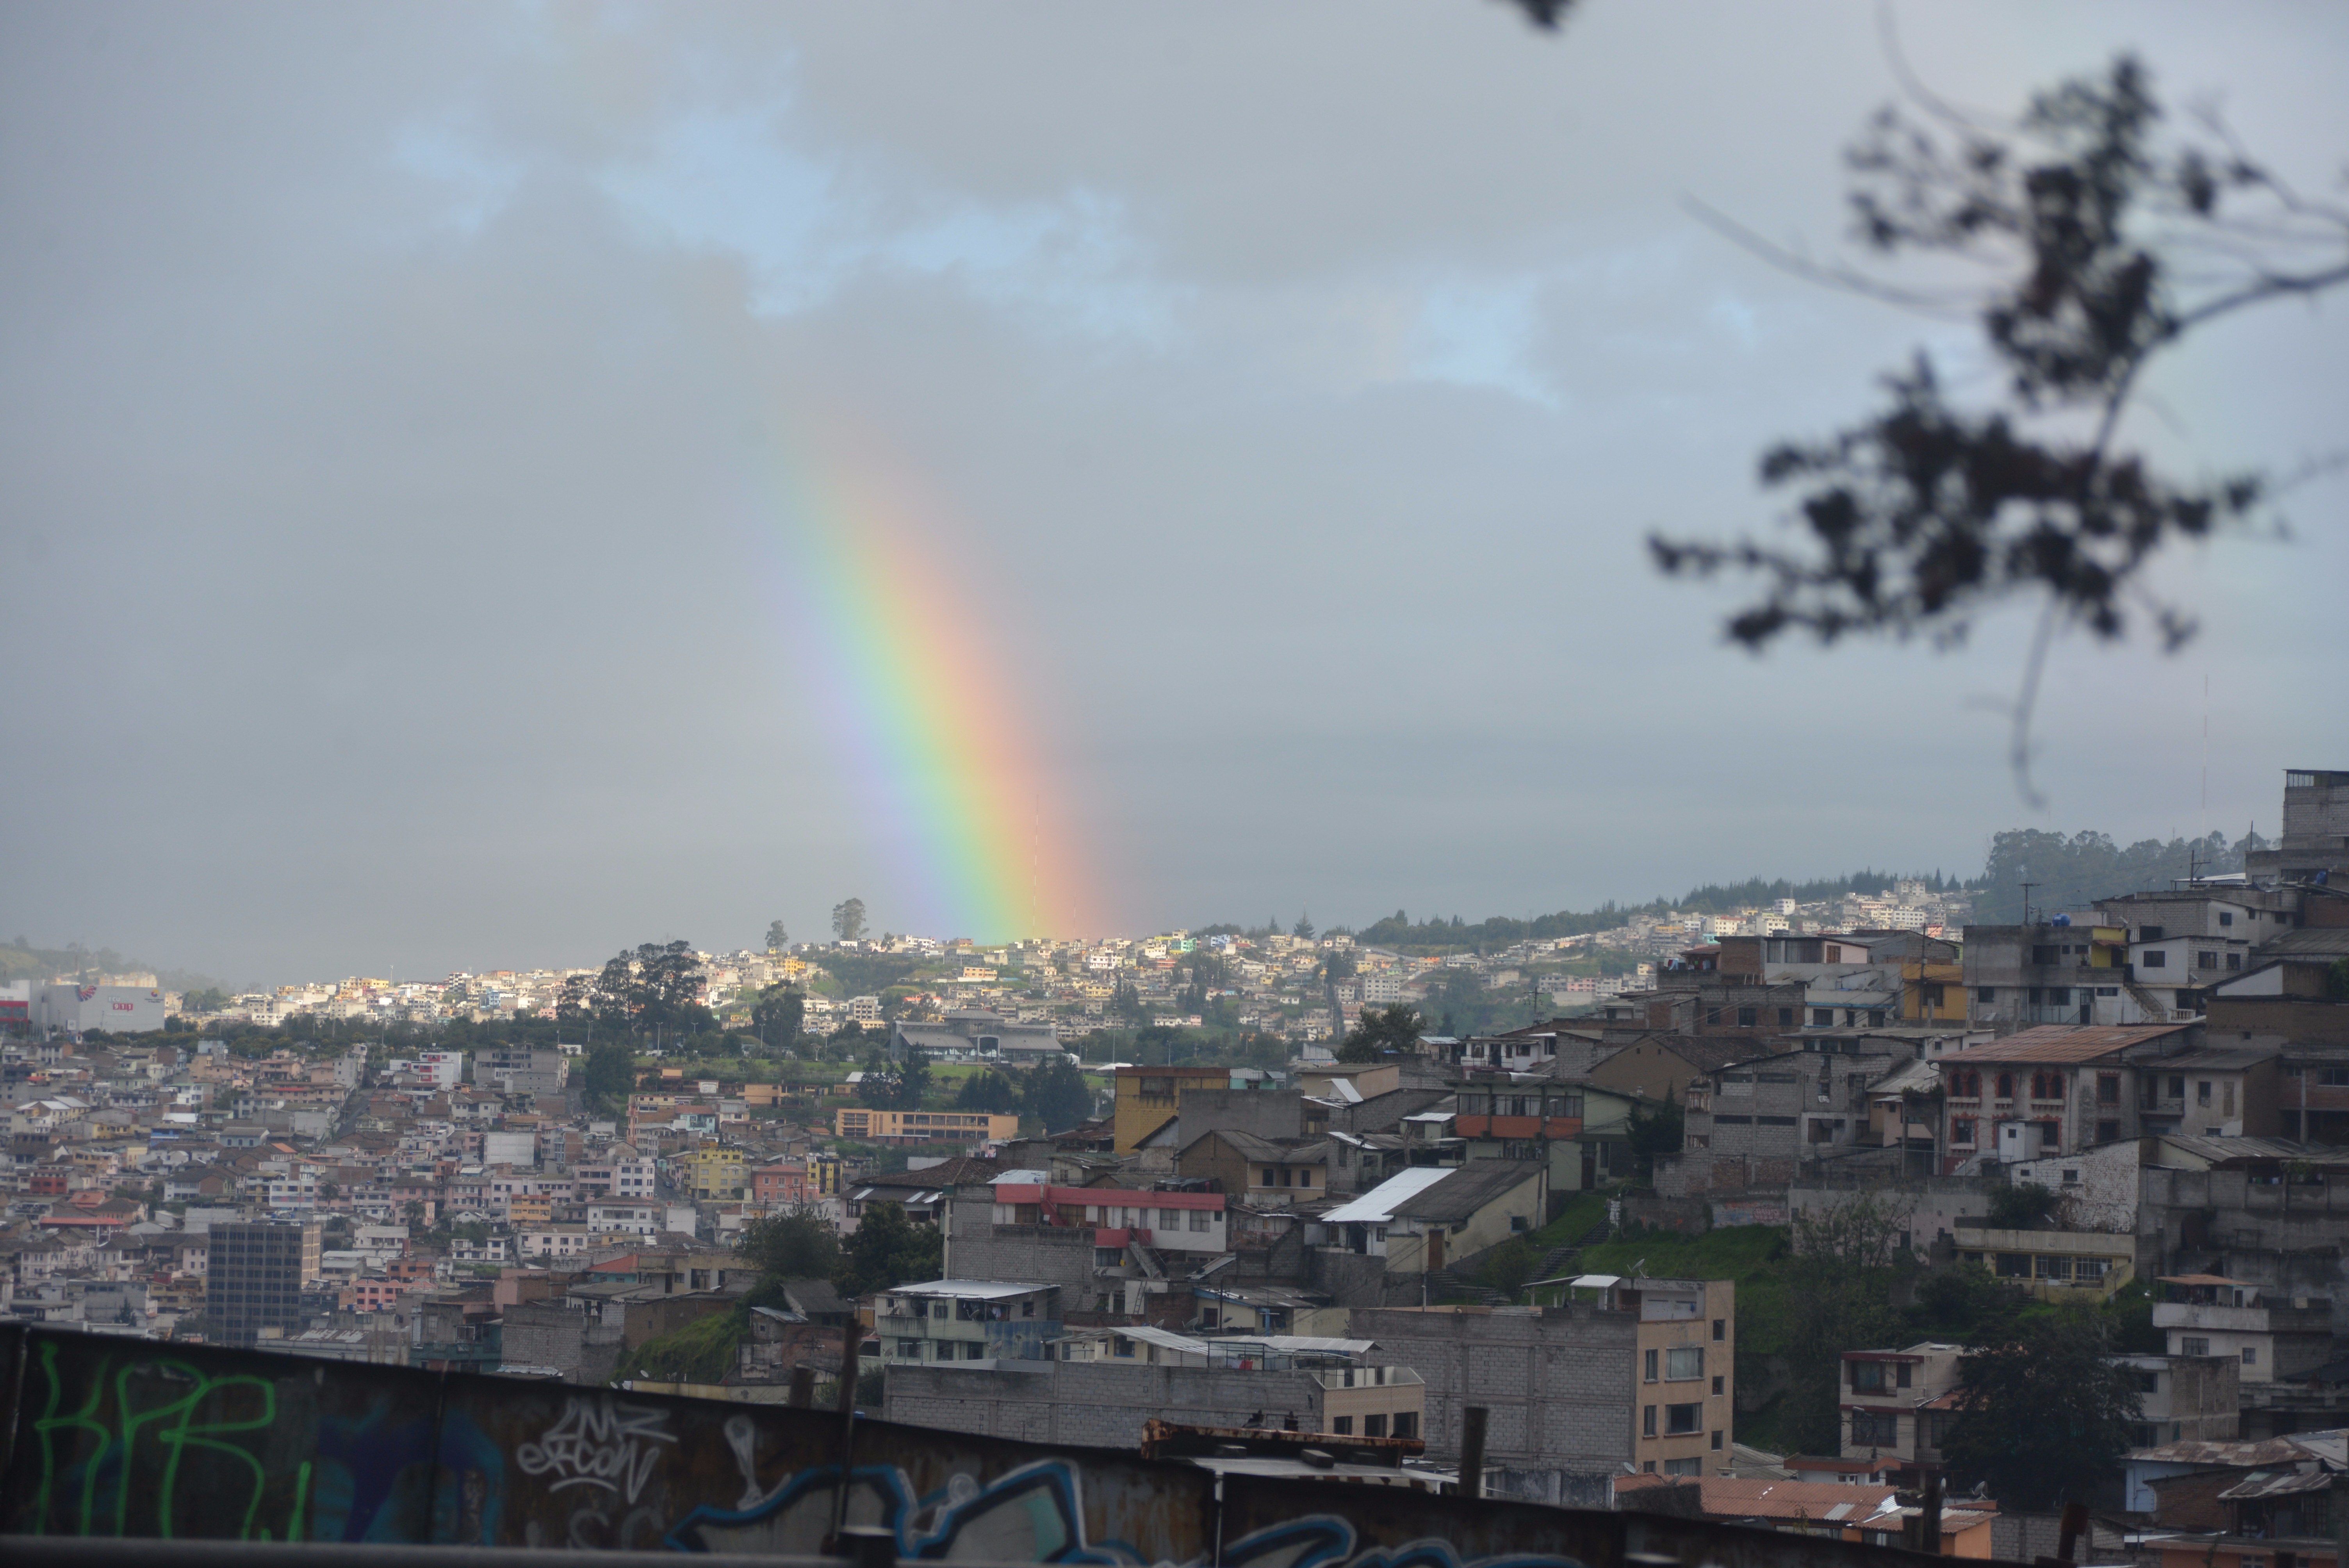 Quito seems a city of perpetual rainbows.